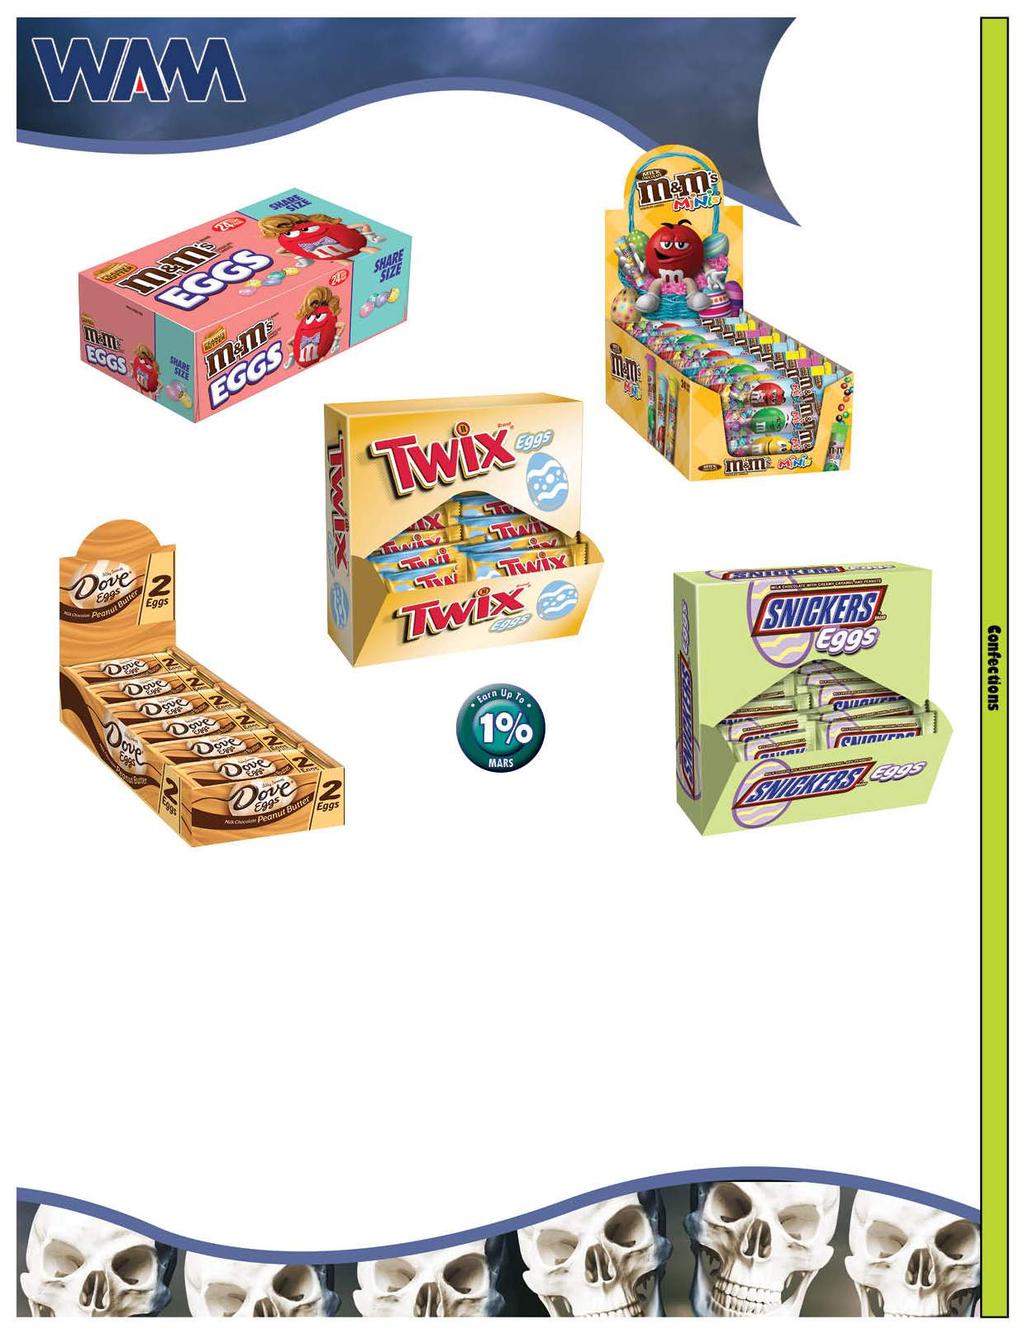 43.7% CT. Description UPC Item # Allow Net MARS Easter Candy Delivery Date: 2/18/18 0-40000- 24 Dove Peanut Butter Eggs 2 To Go 2.12oz #52678 52676-6 994-512 $28.13 $2.59 $25.54 $1.06 $1.89 43.